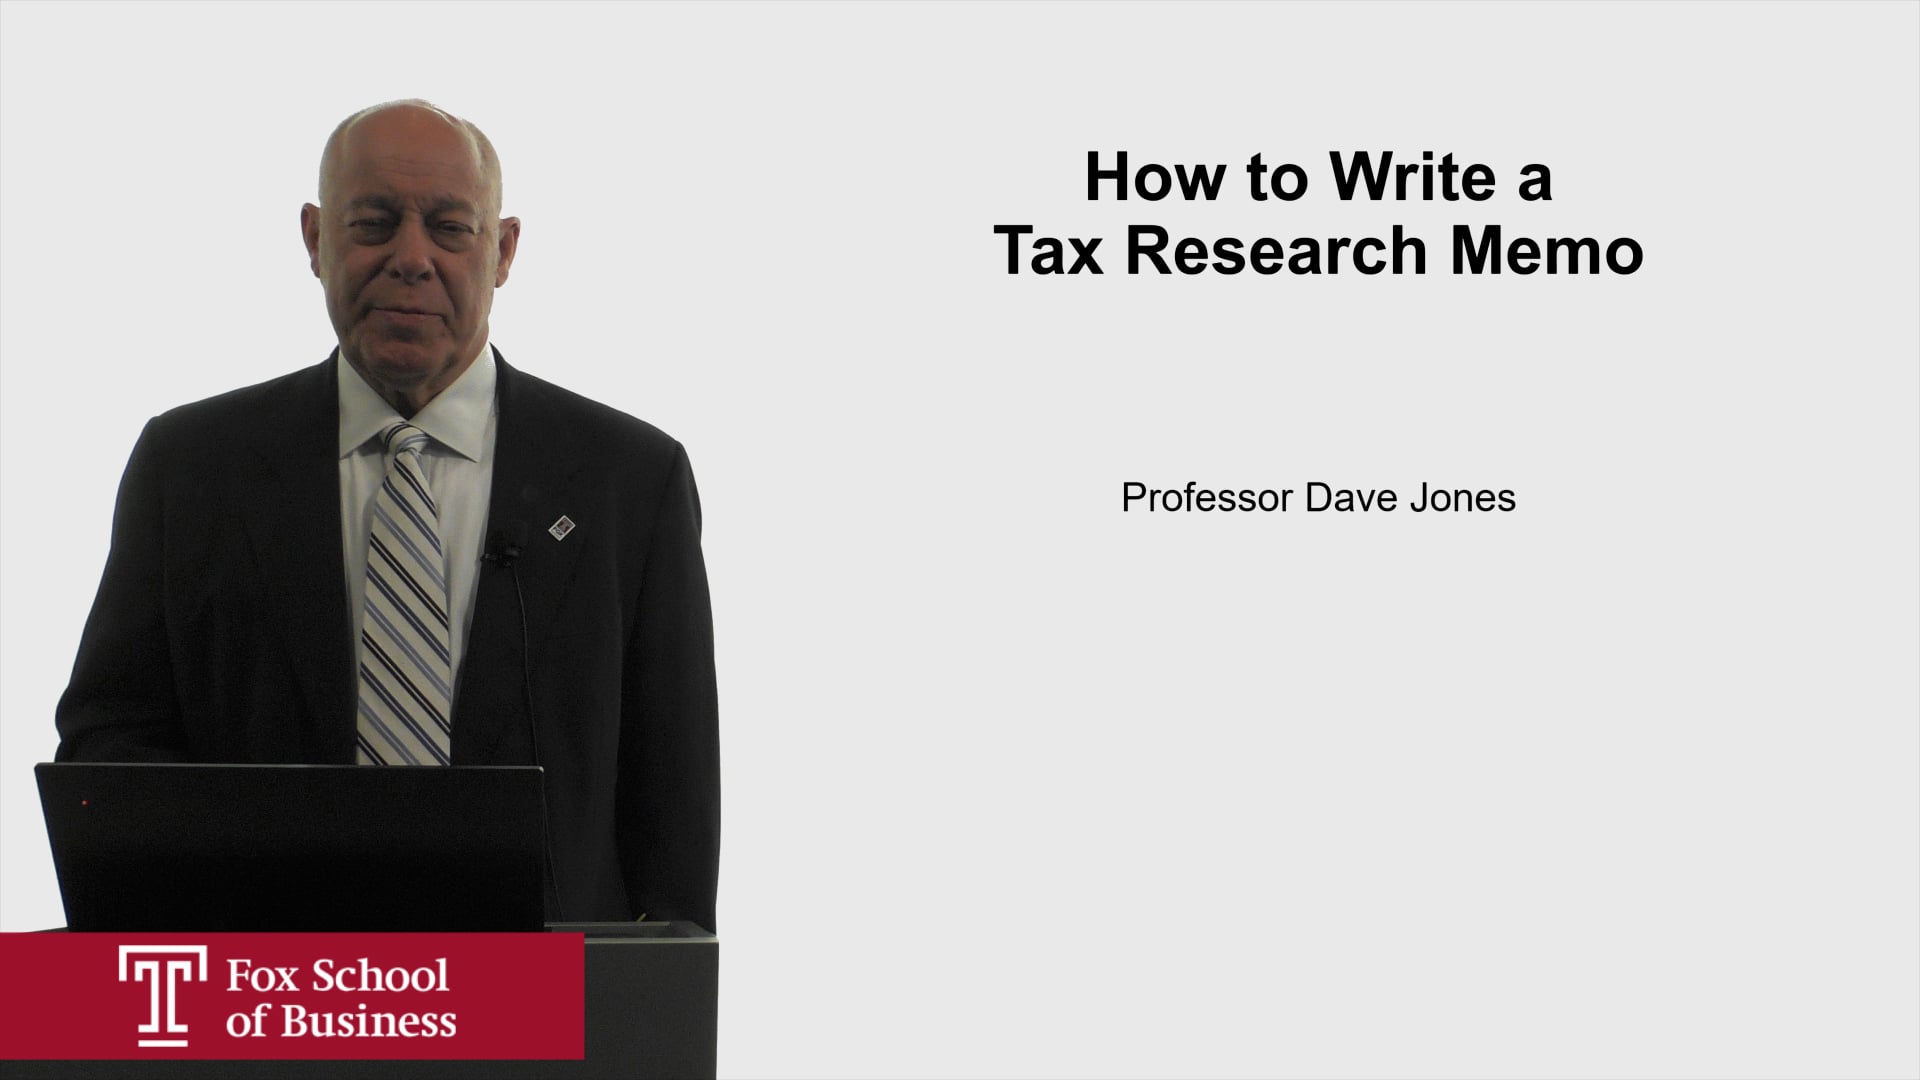 How to Write a Tax Research Memo